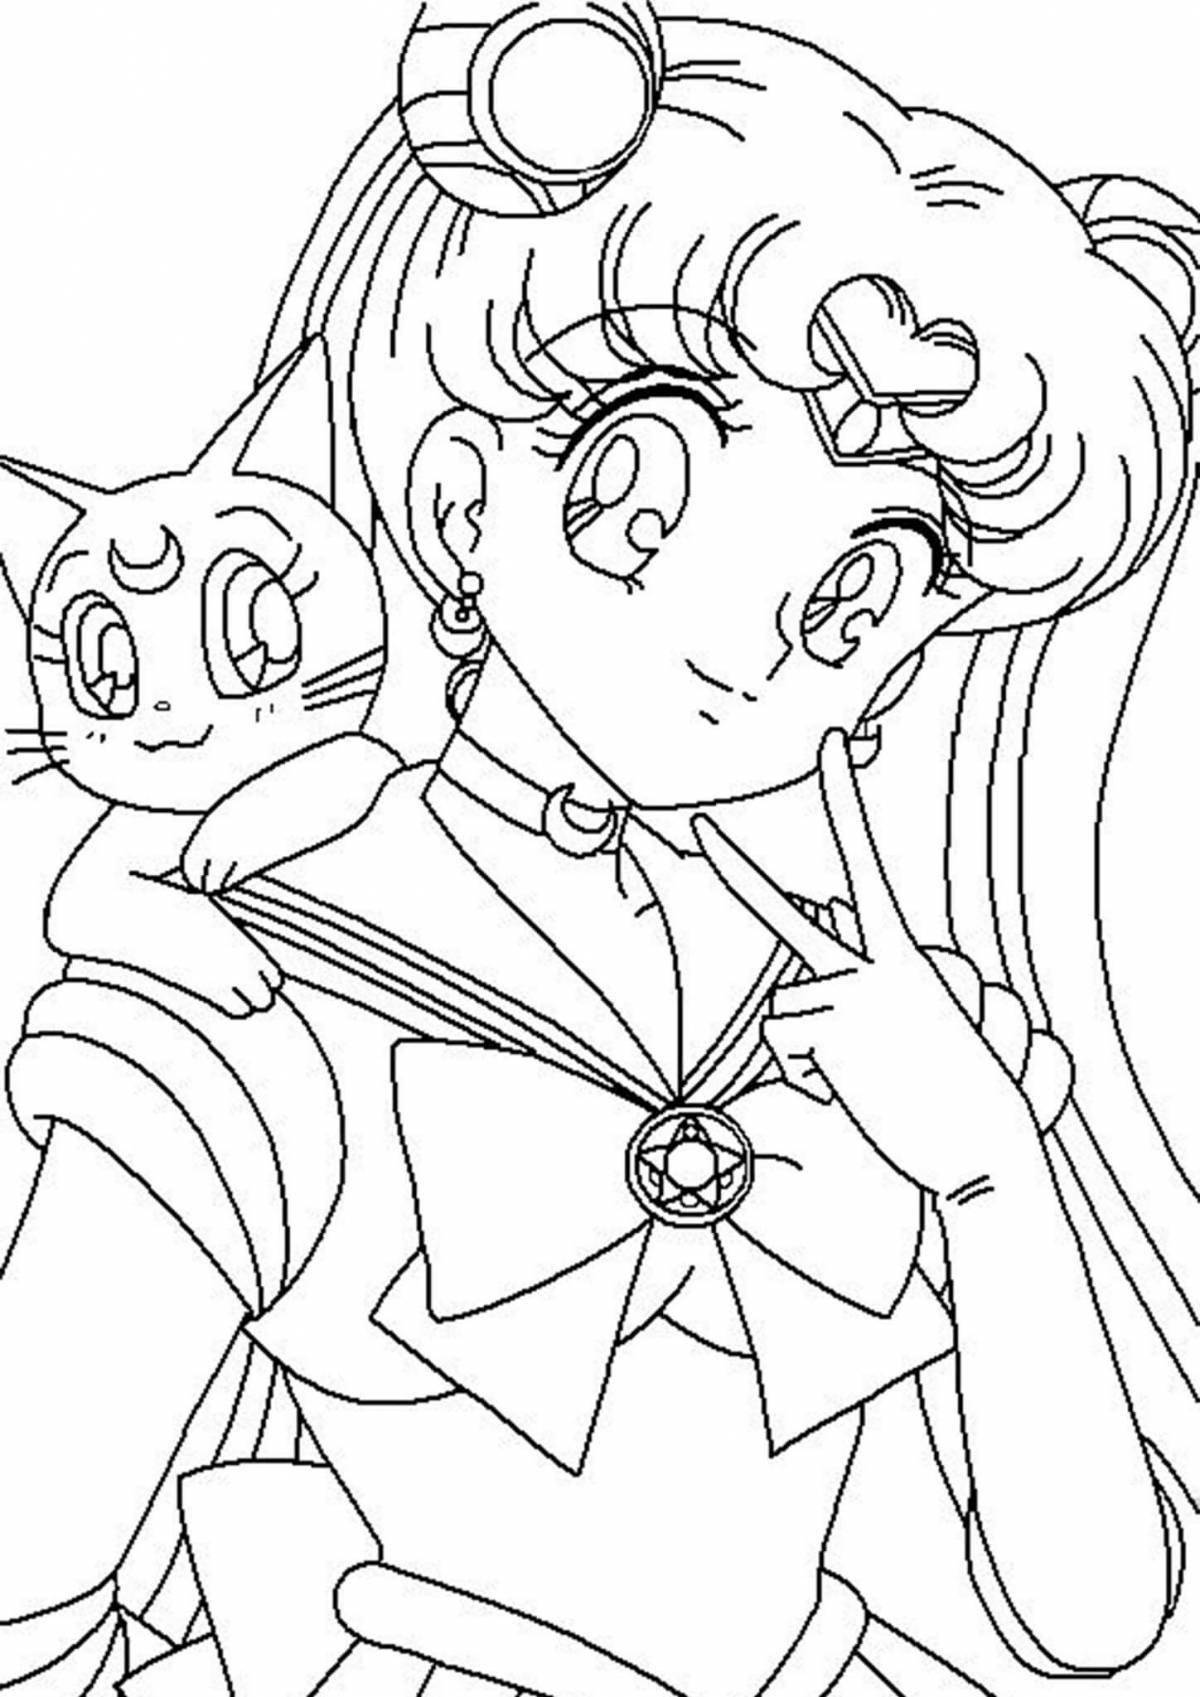 Playful sailor moon coloring page